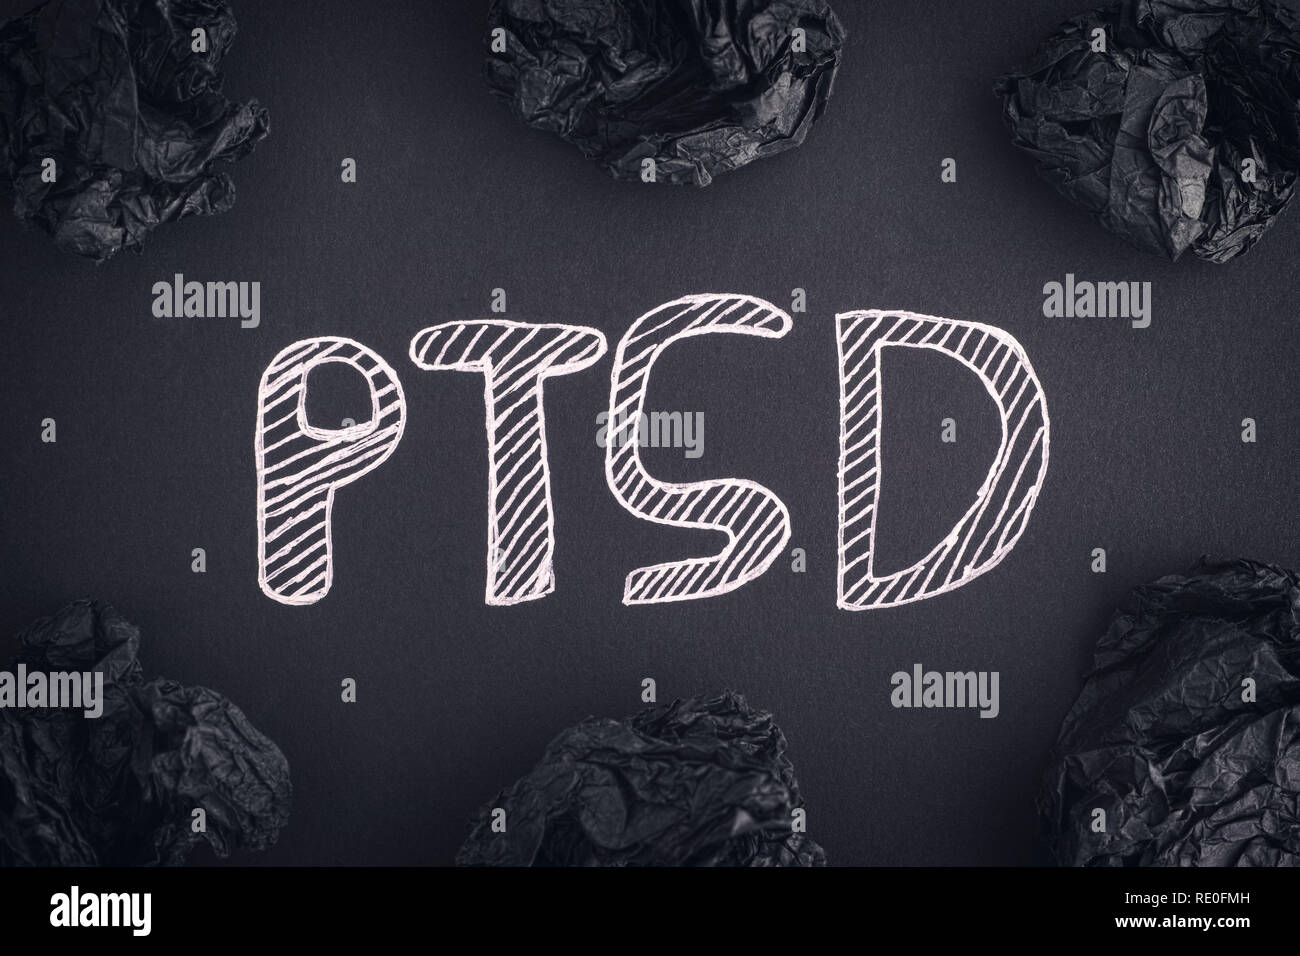 Post Traumatic Stress Disorder. Abbreviation PTSD on a black background and black crumpled paper balls around it. Close up. Stock Photo